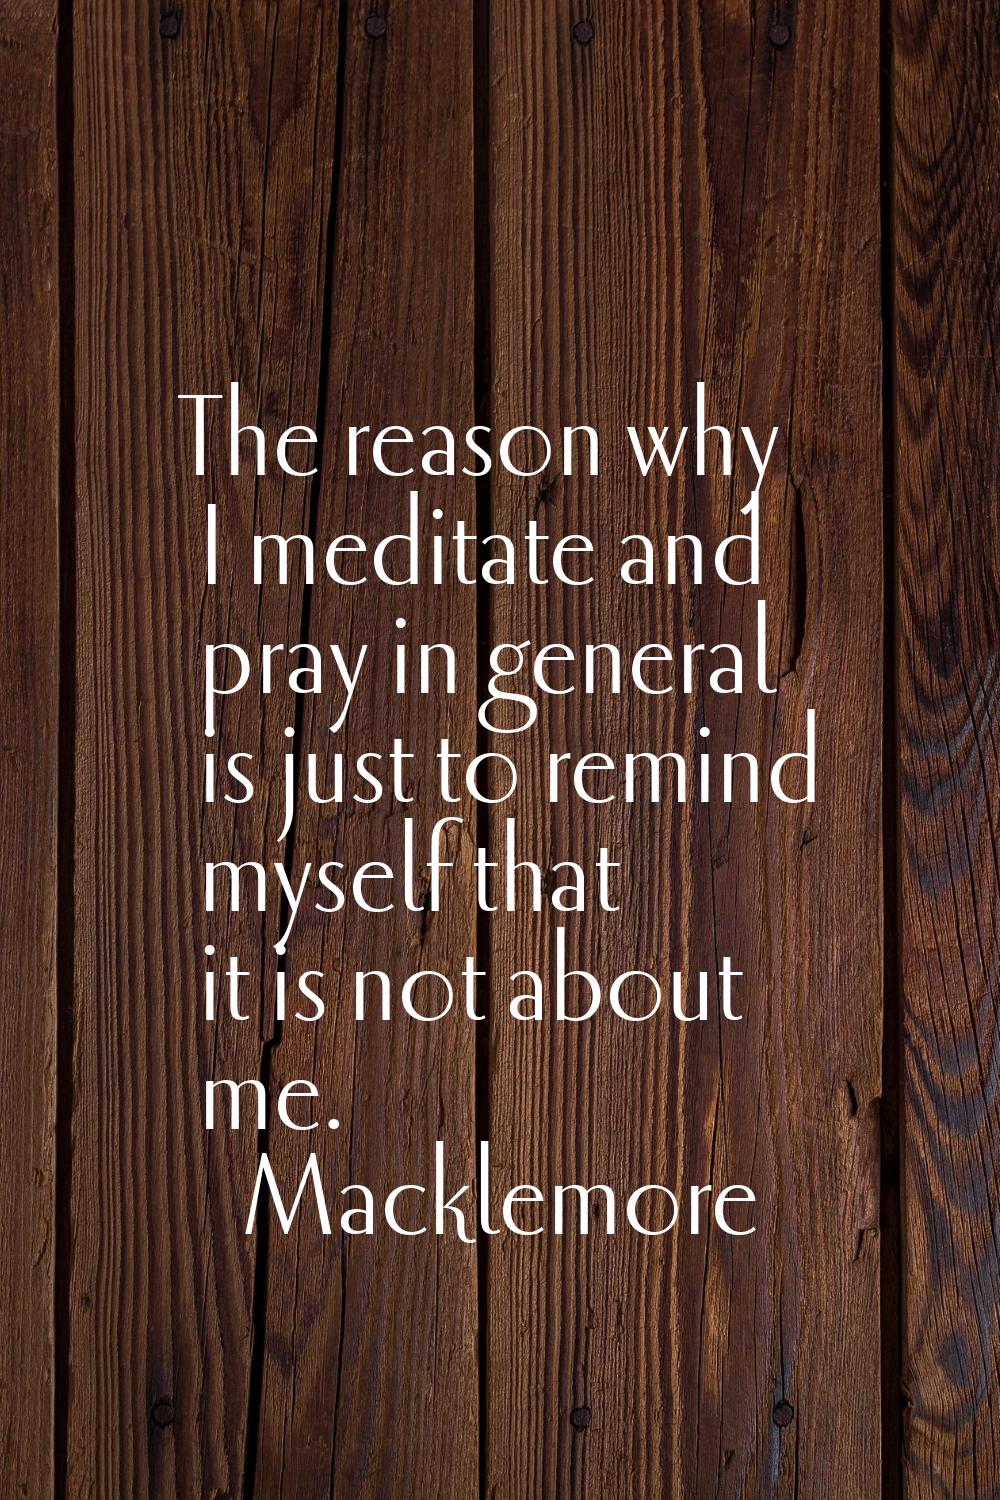 The reason why I meditate and pray in general is just to remind myself that it is not about me.